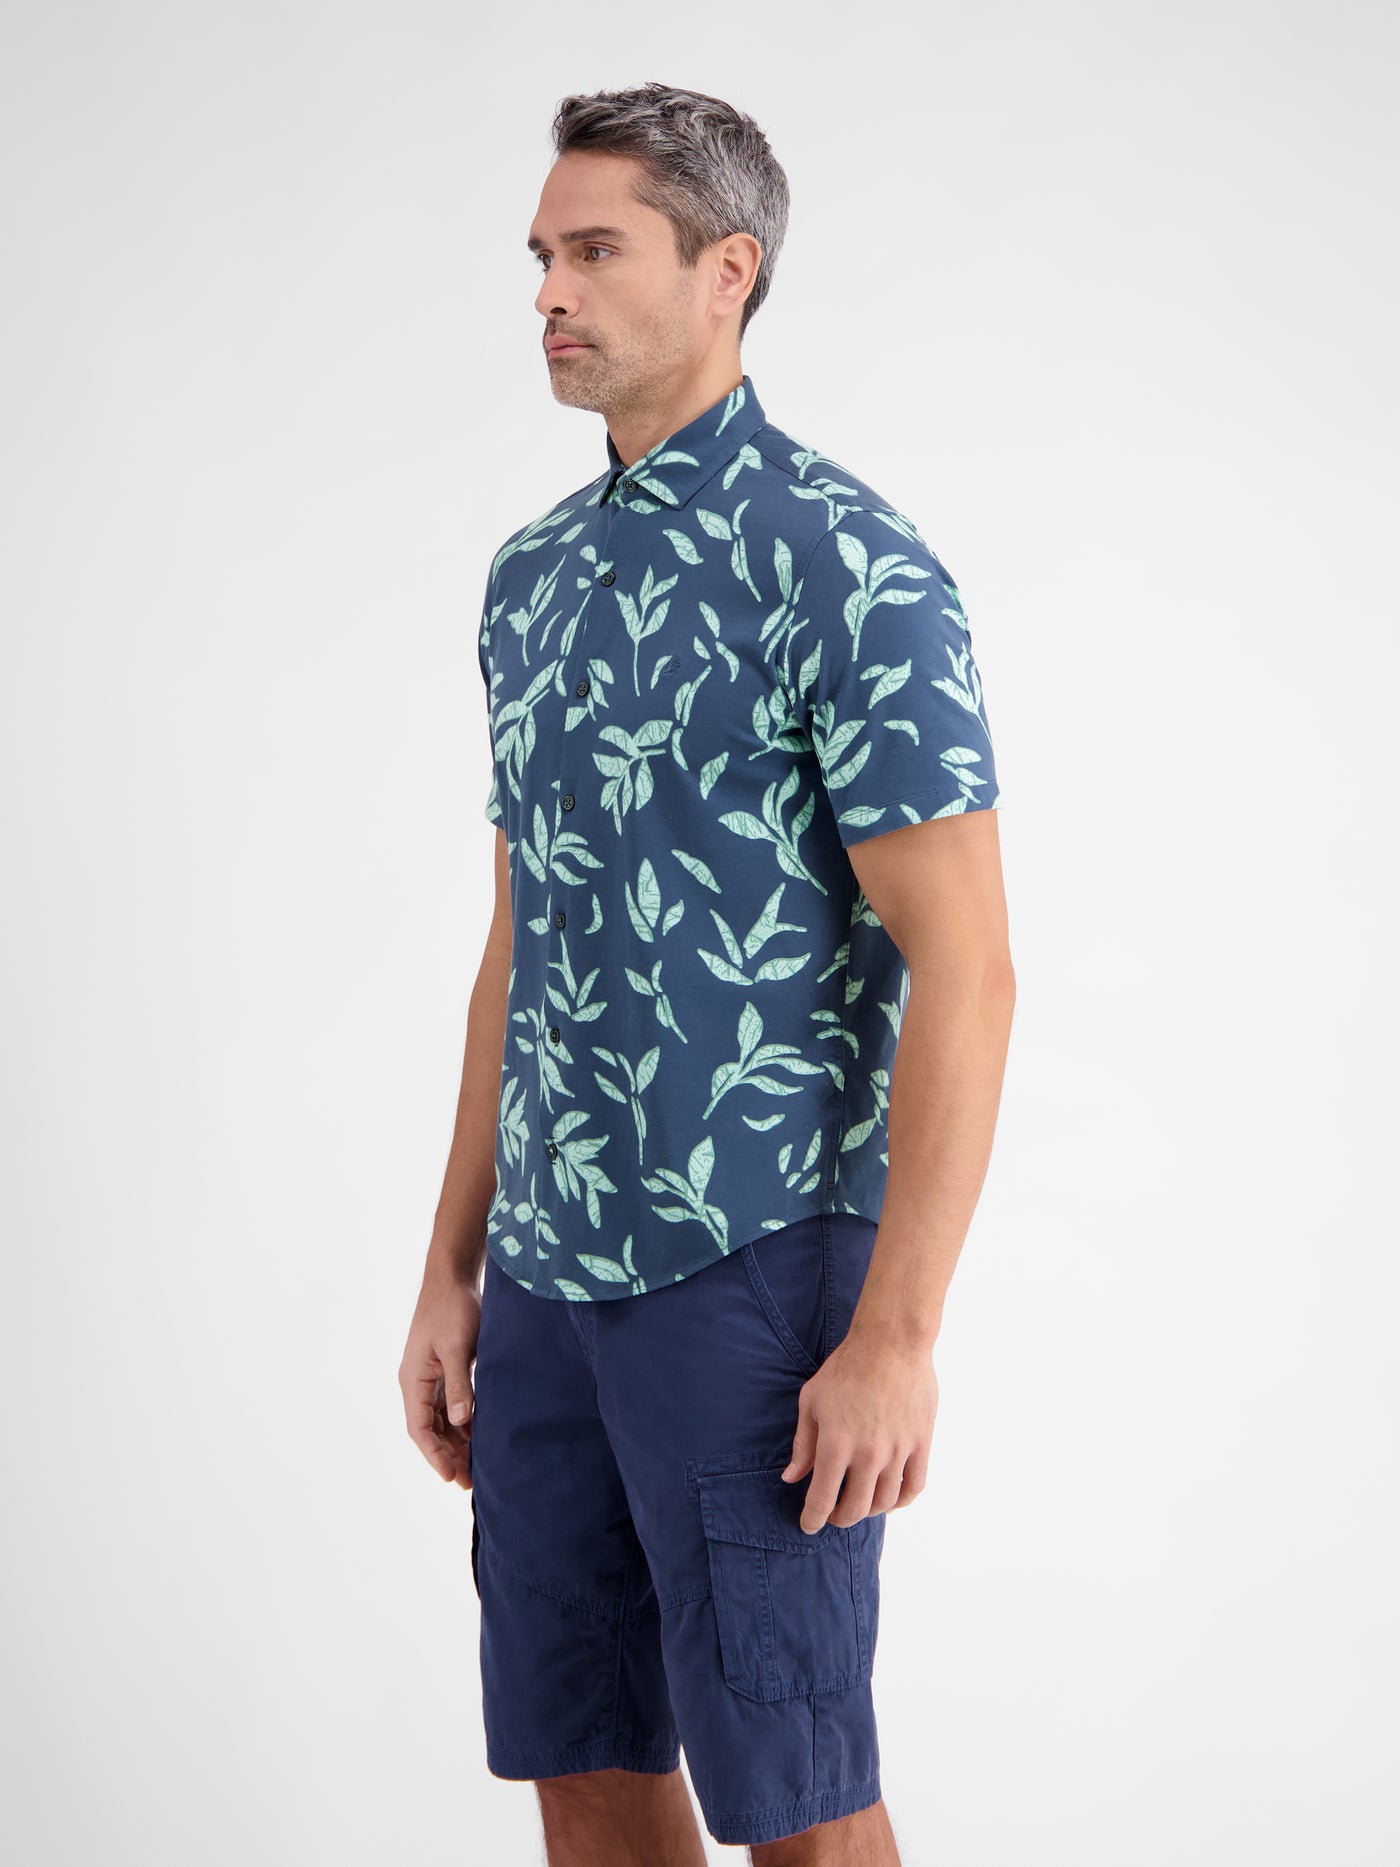 Short sleeve shirt with a floral print